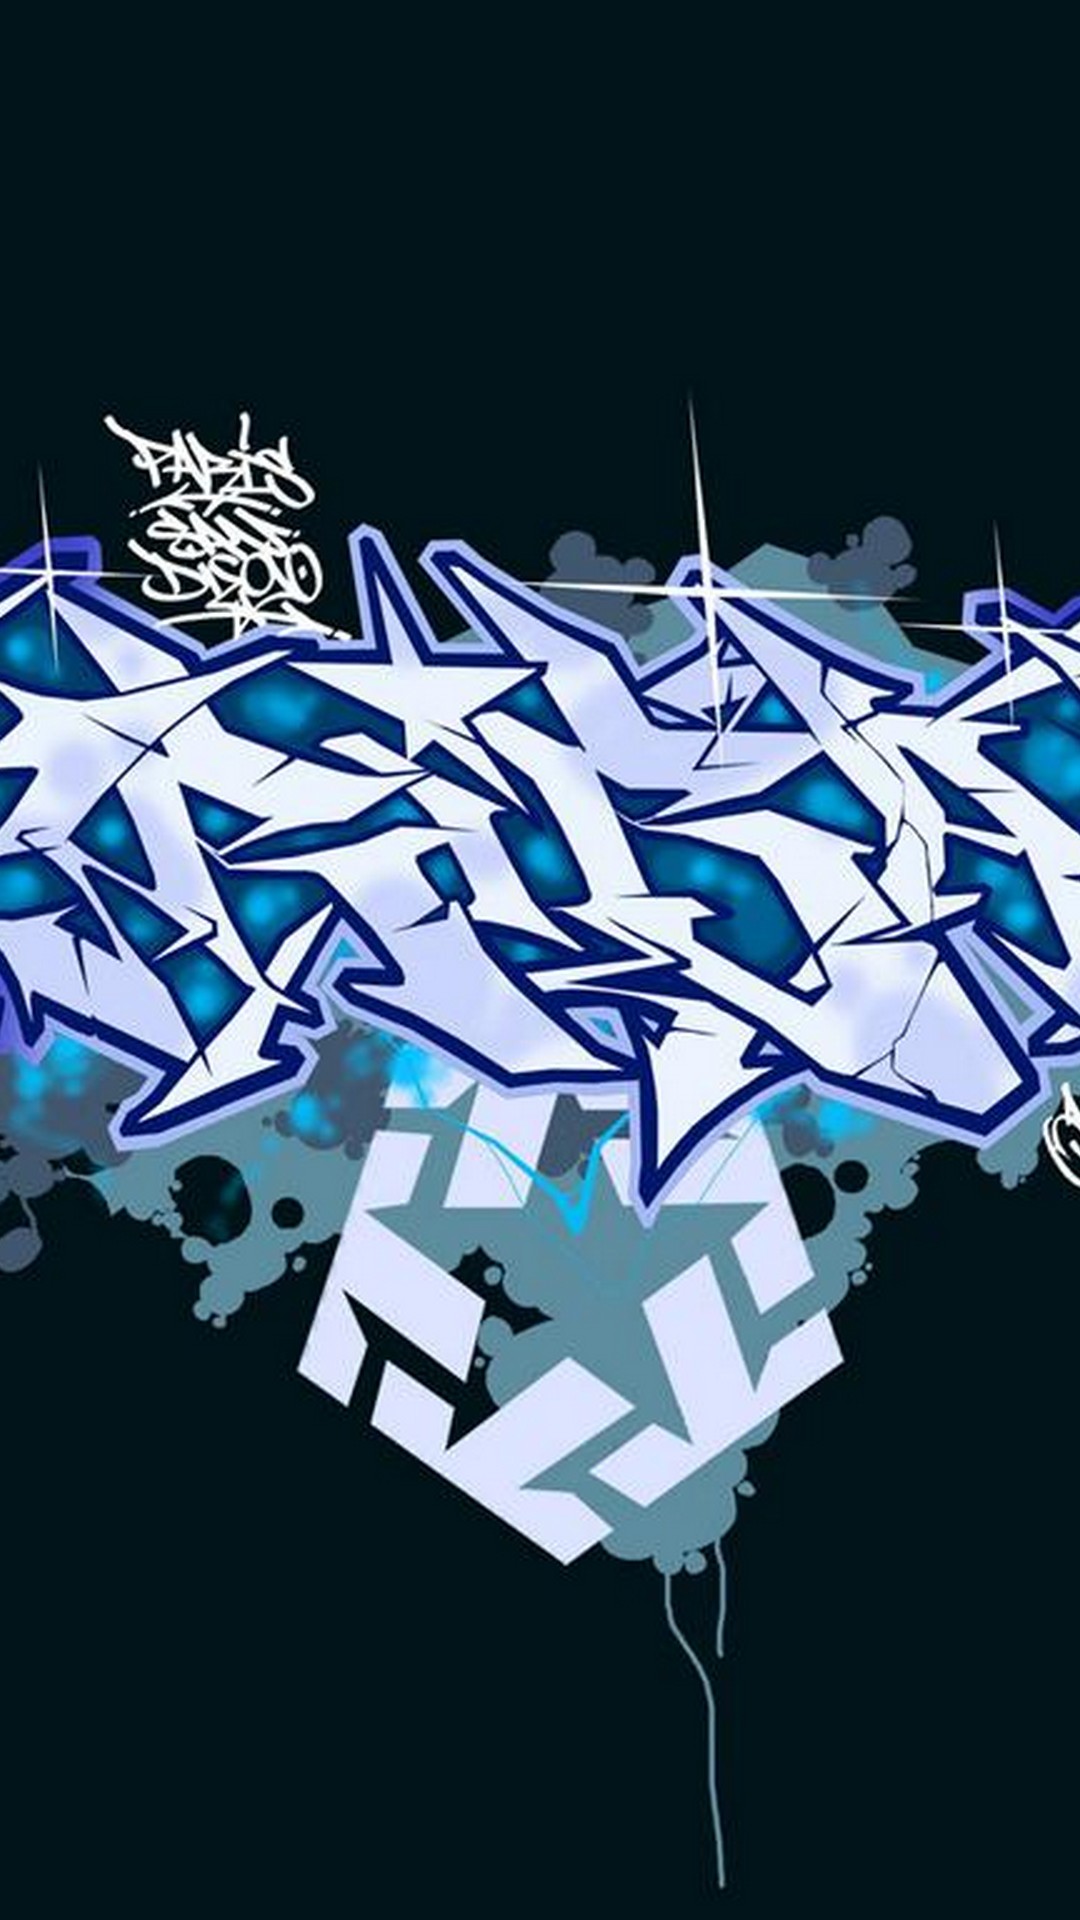 Graffiti iPhone Wallpaper HD With Resolution 1080X1920 pixel. You can make this wallpaper for your Desktop Computer Backgrounds, Mac Wallpapers, Android Lock screen or iPhone Screensavers